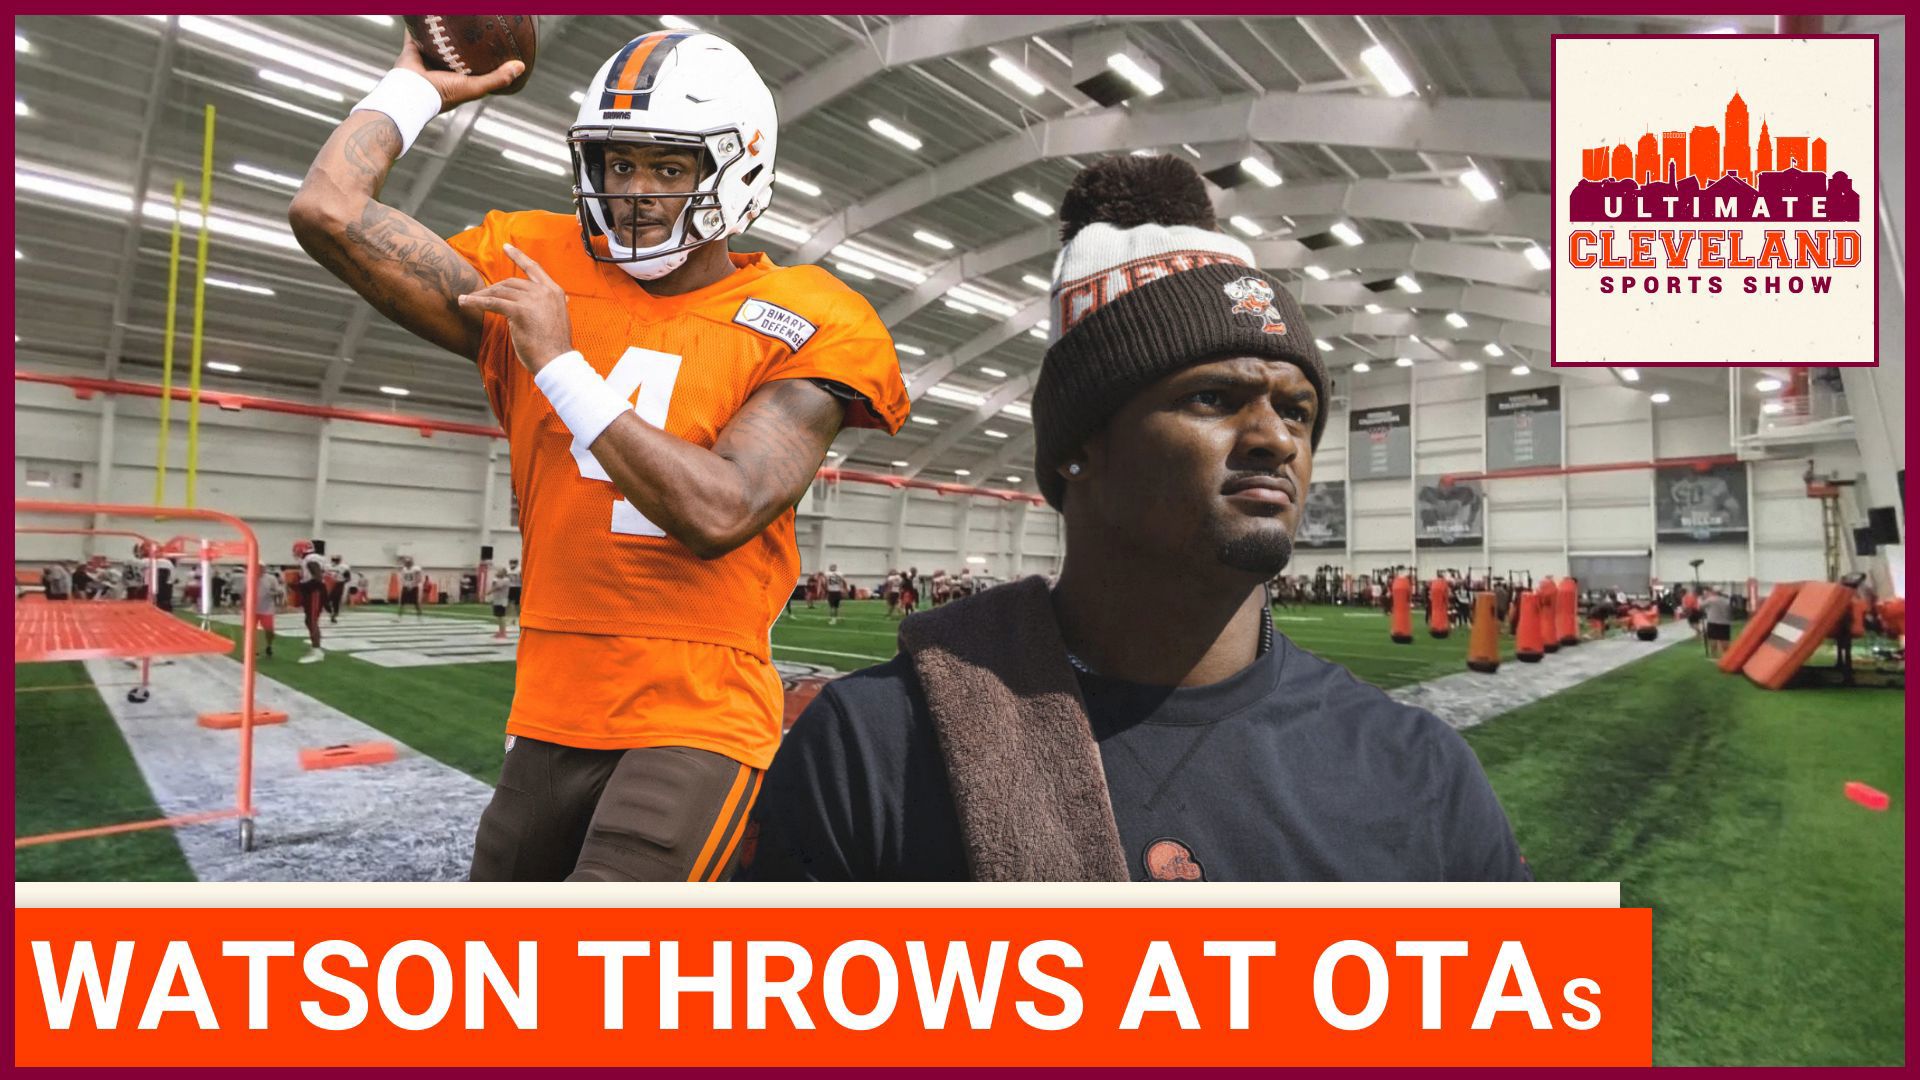 How did Deshaun Watson fair in throwing the football for the first time publicly since surgery in November? UCSS has the conversation